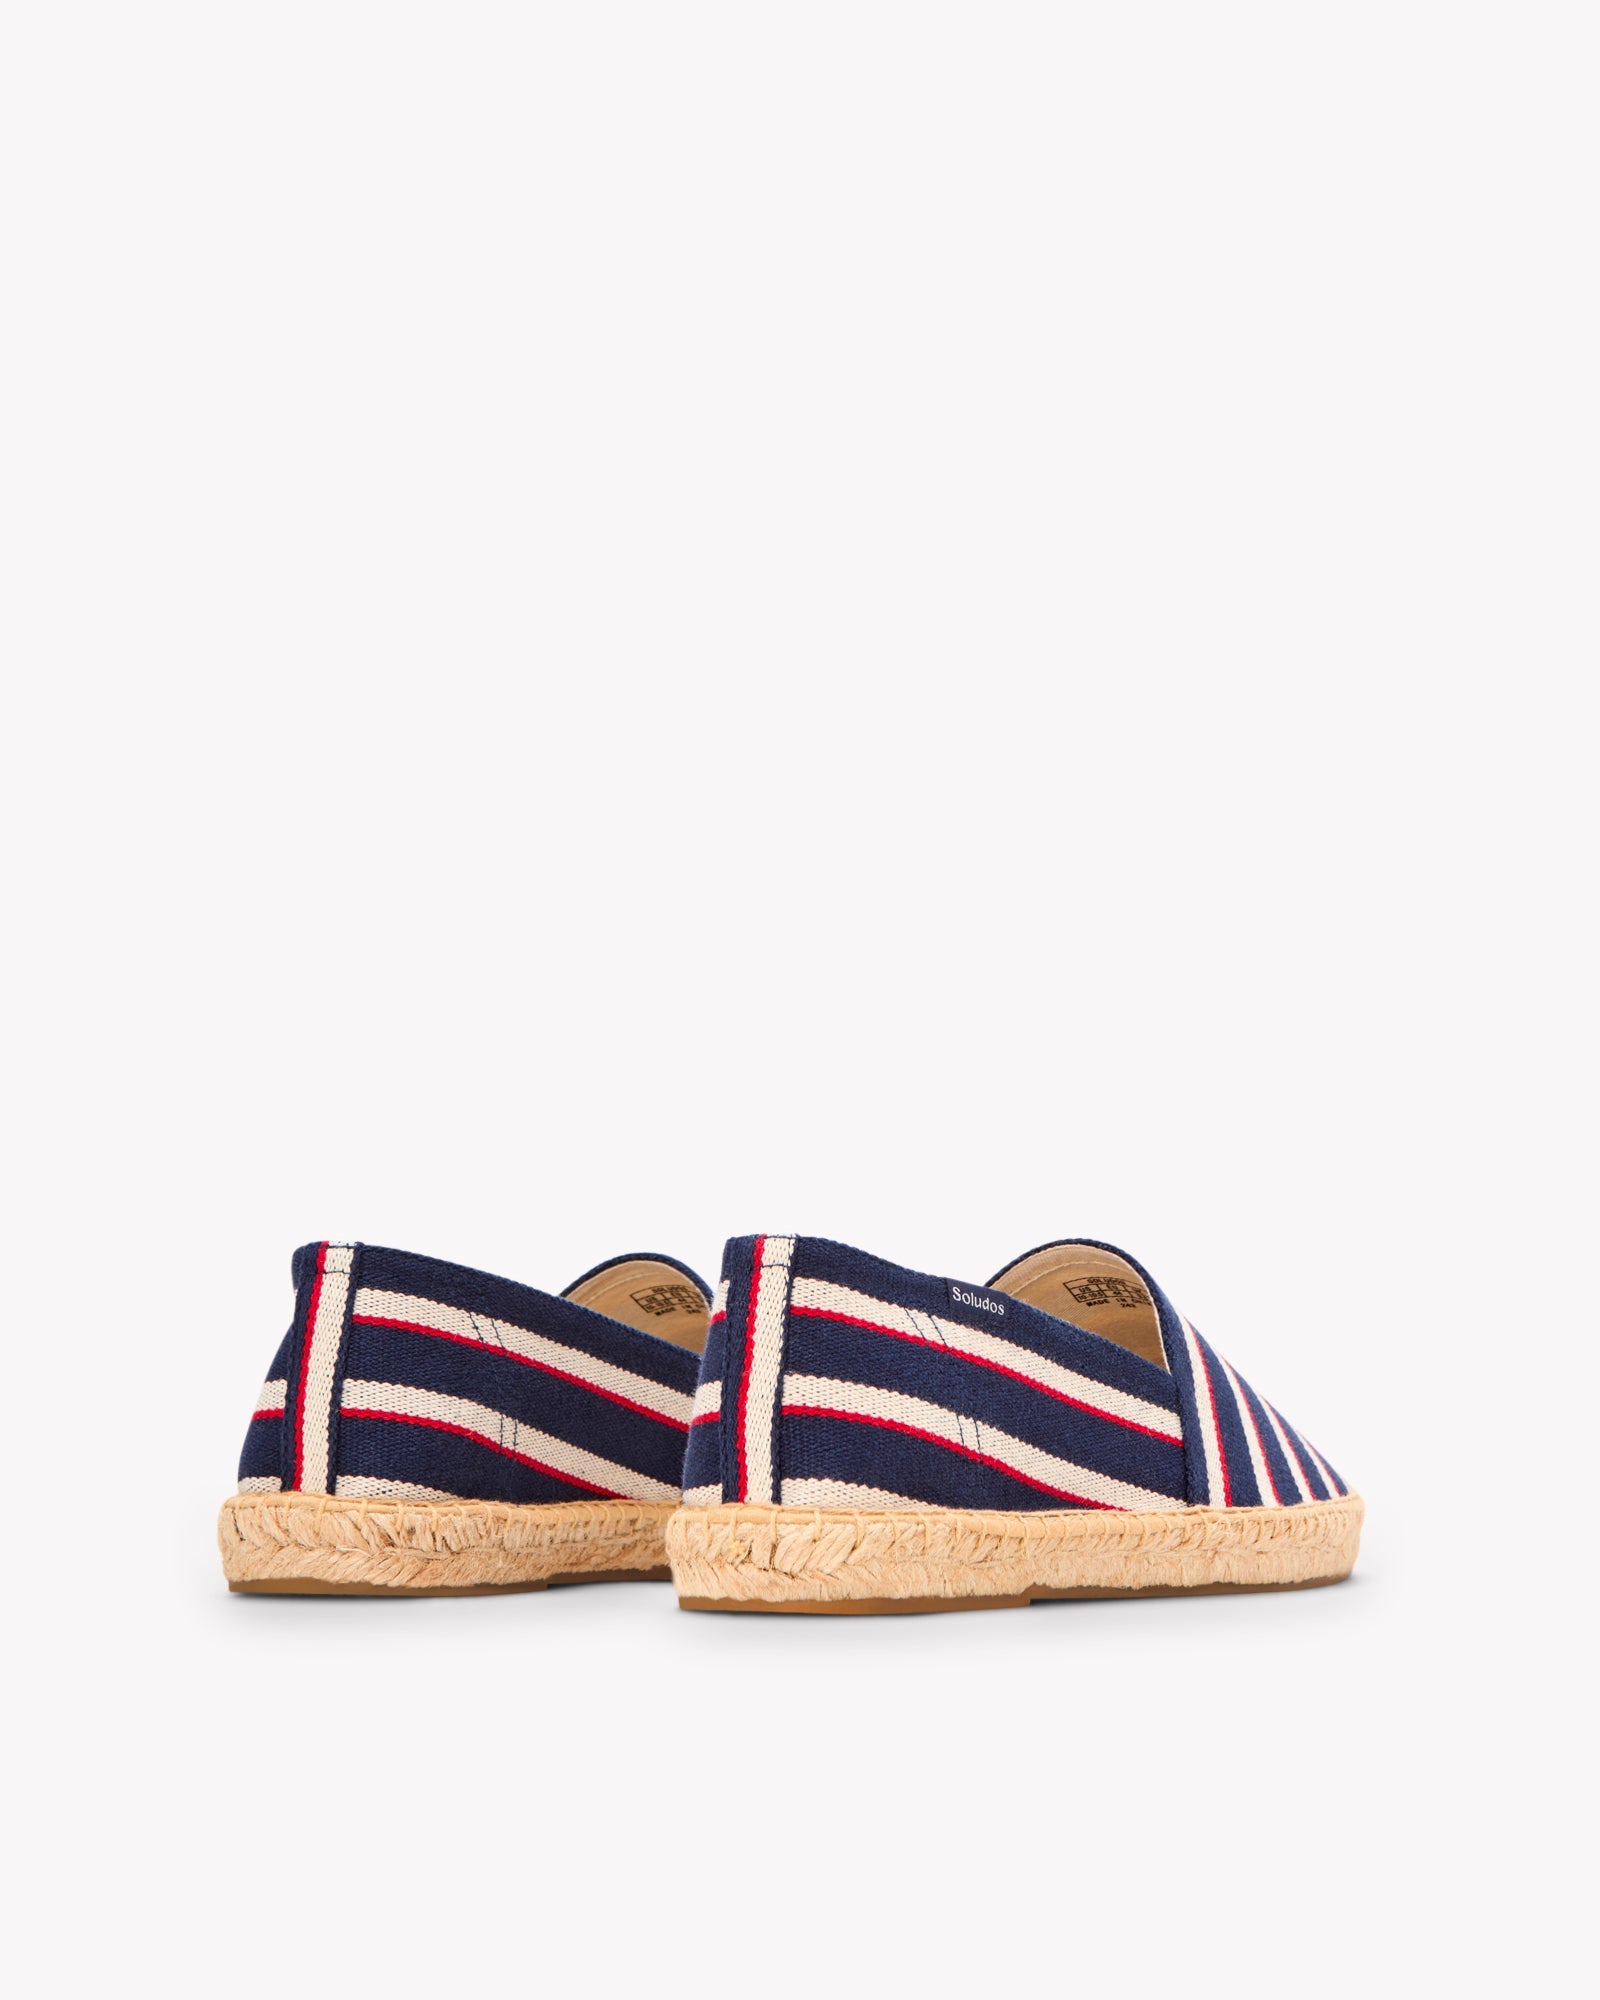 The Original Espadrille - Classic Stripes - Navy / Ivory / Red - Men's